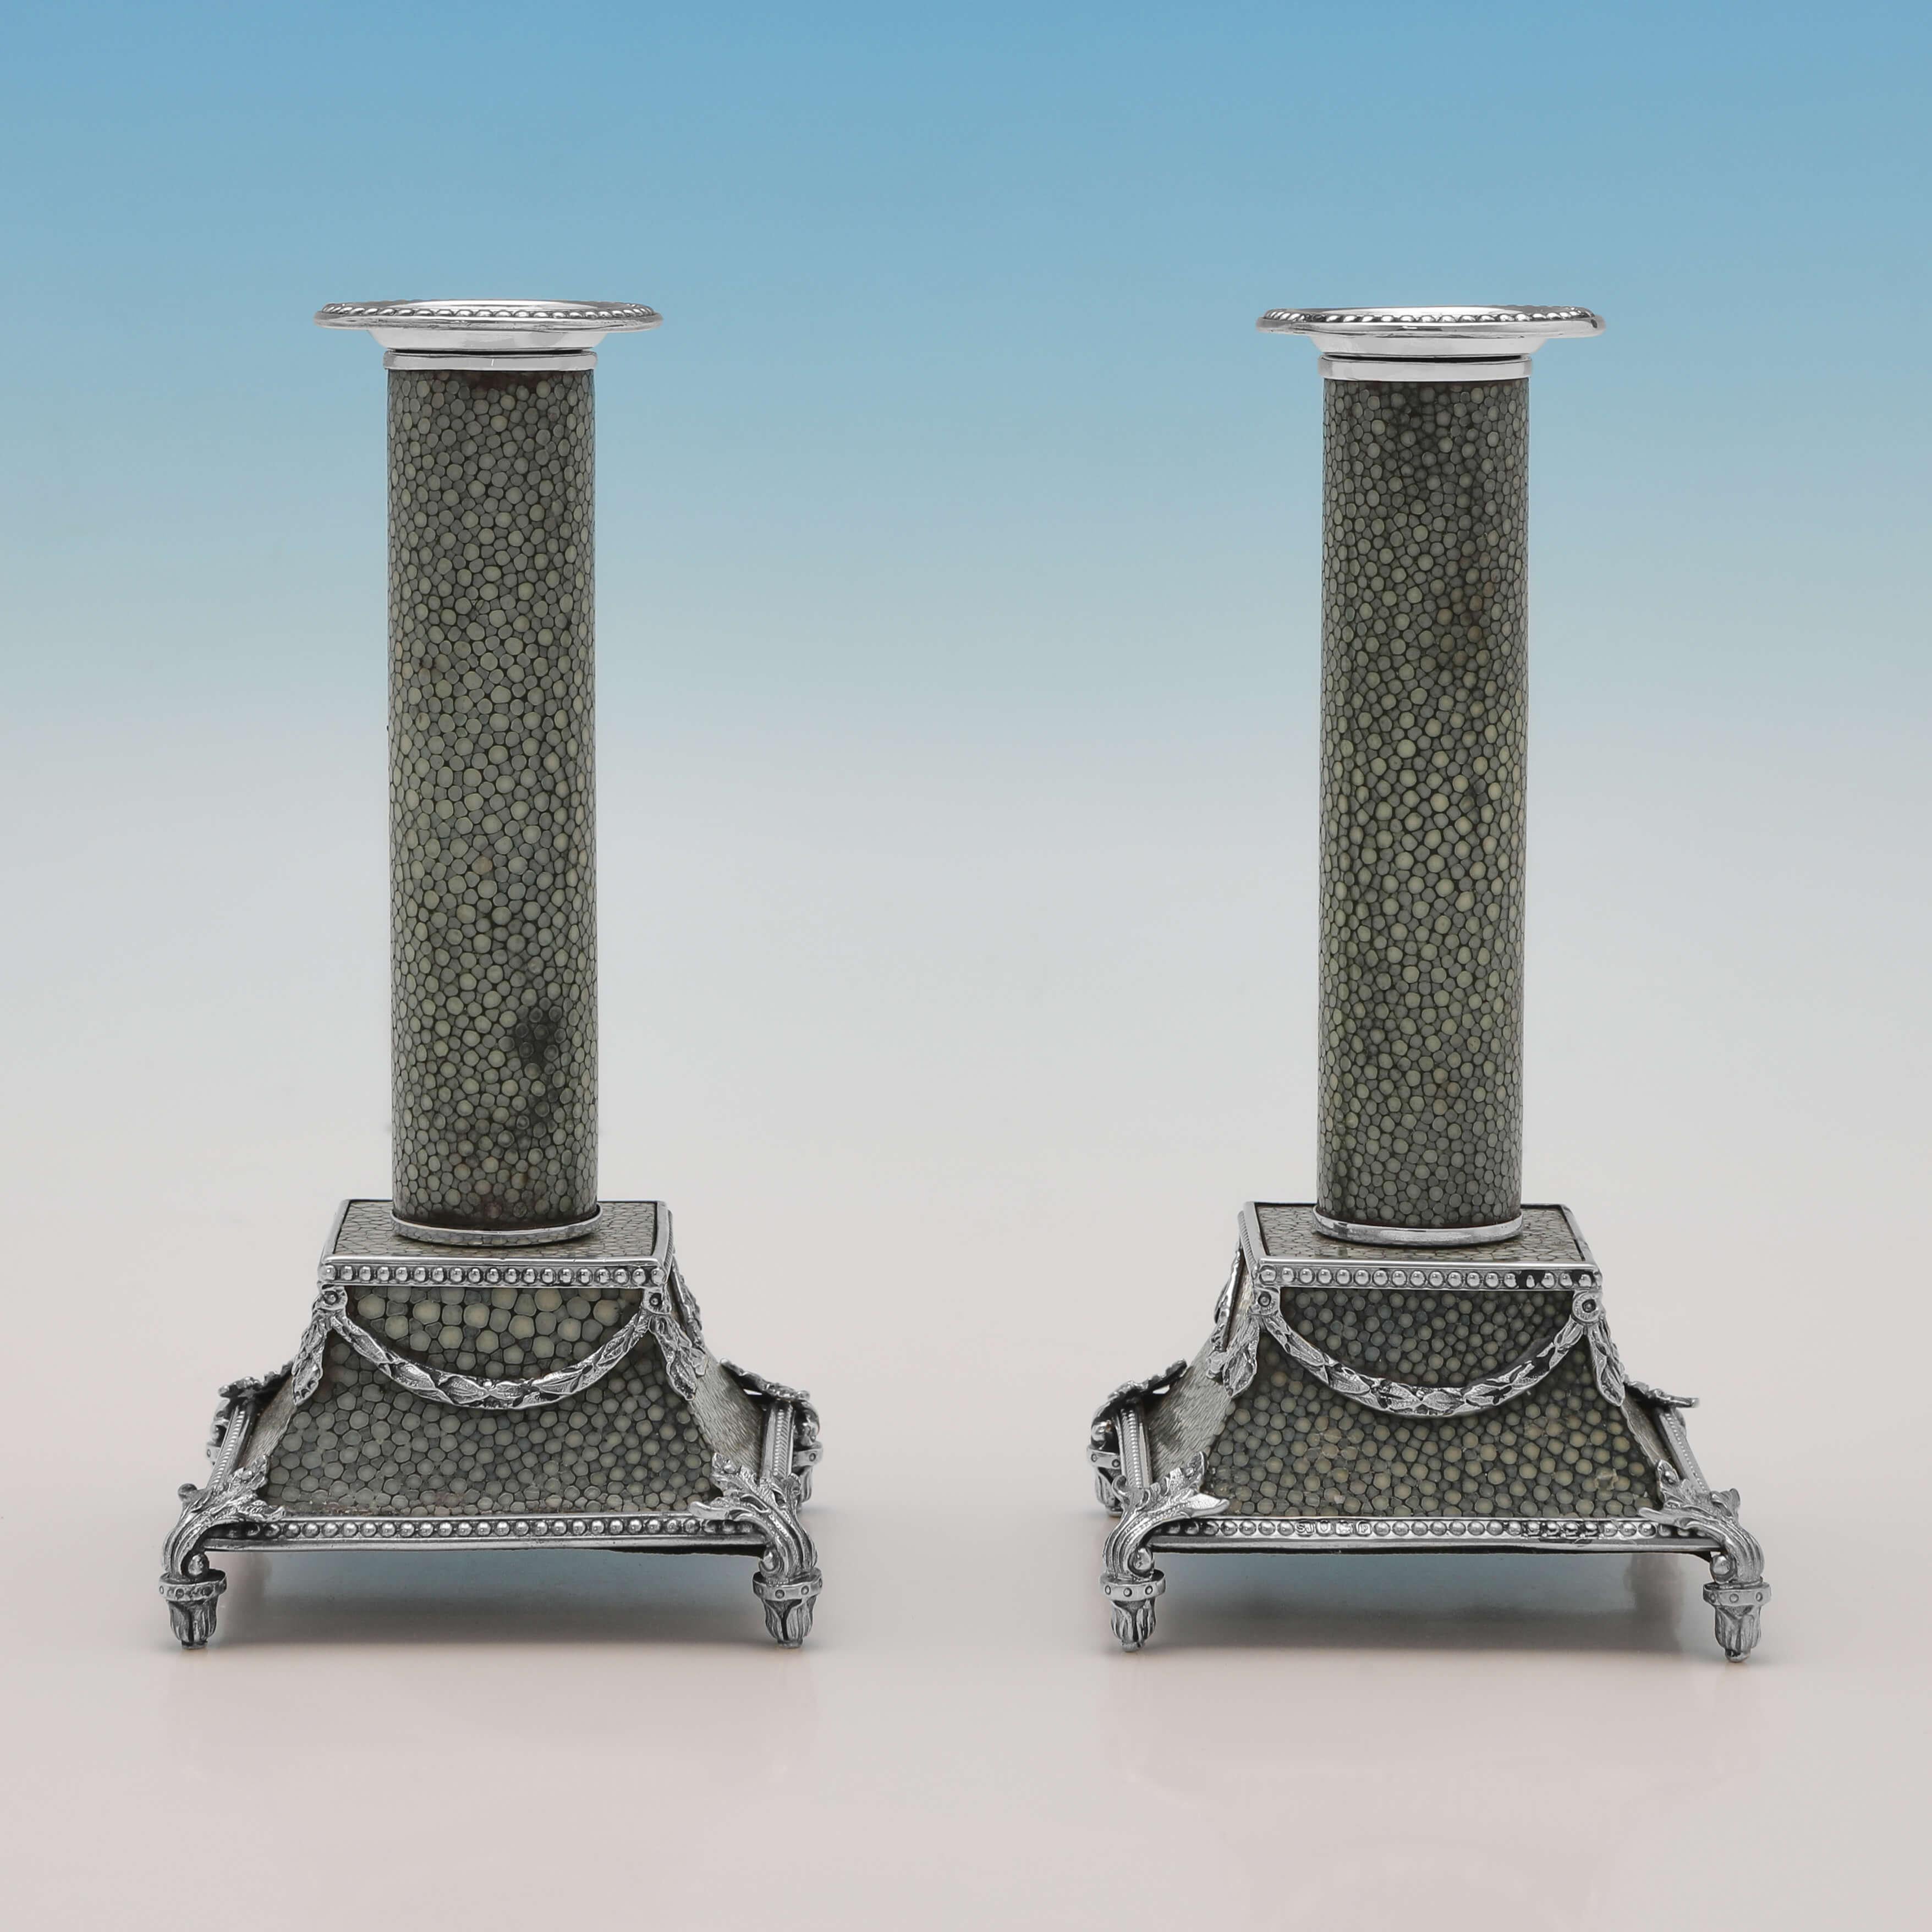 Hallmarked in London in 1910 by Samuel Jacob, this incredible antique sterling silver & Shagreen desk set, comprises a pair of candlesticks, an ink stand and a pen tray, all featuring neoclassical revival silver decoration. 

Each candlestick